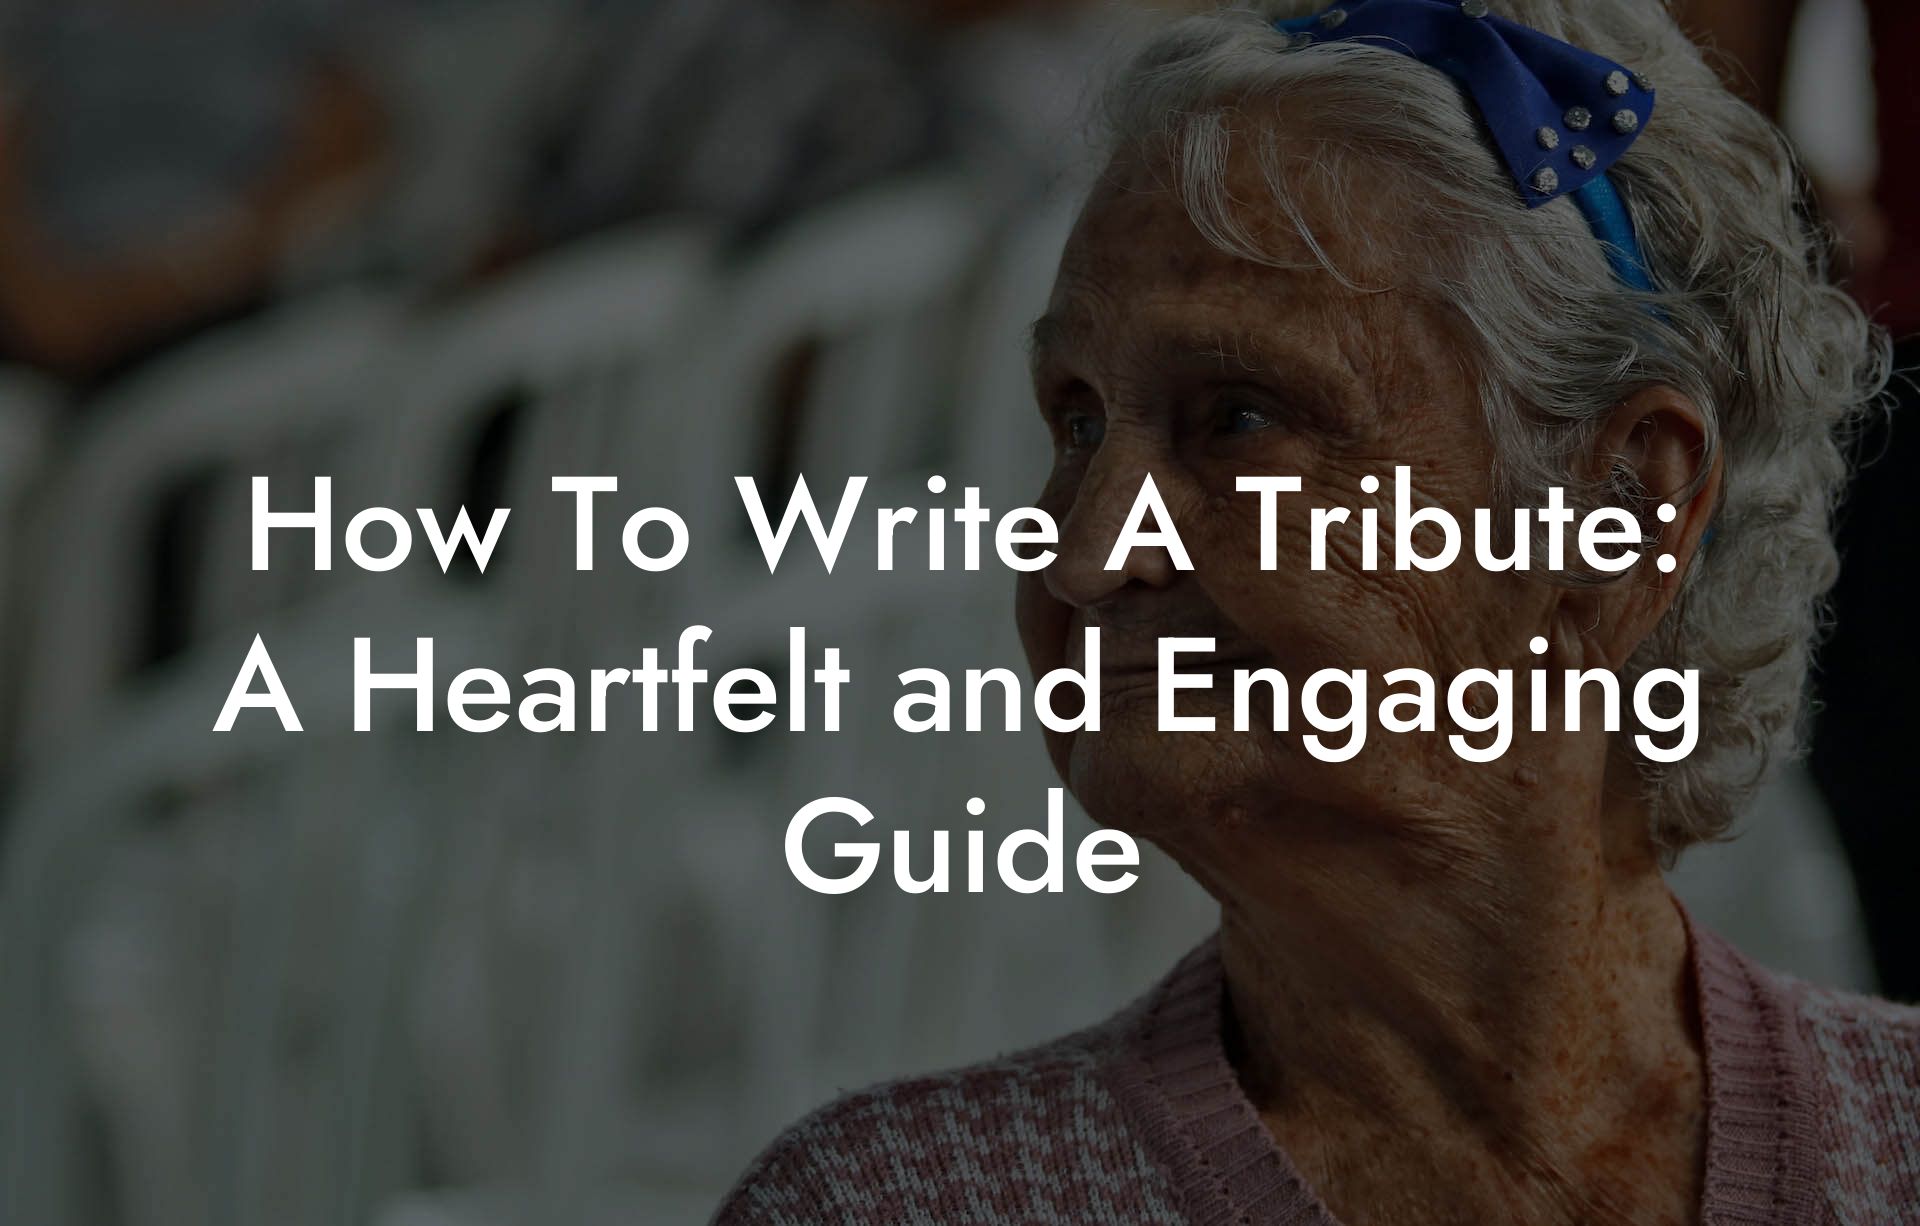 How To Write A Tribute: A Heartfelt and Engaging Guide